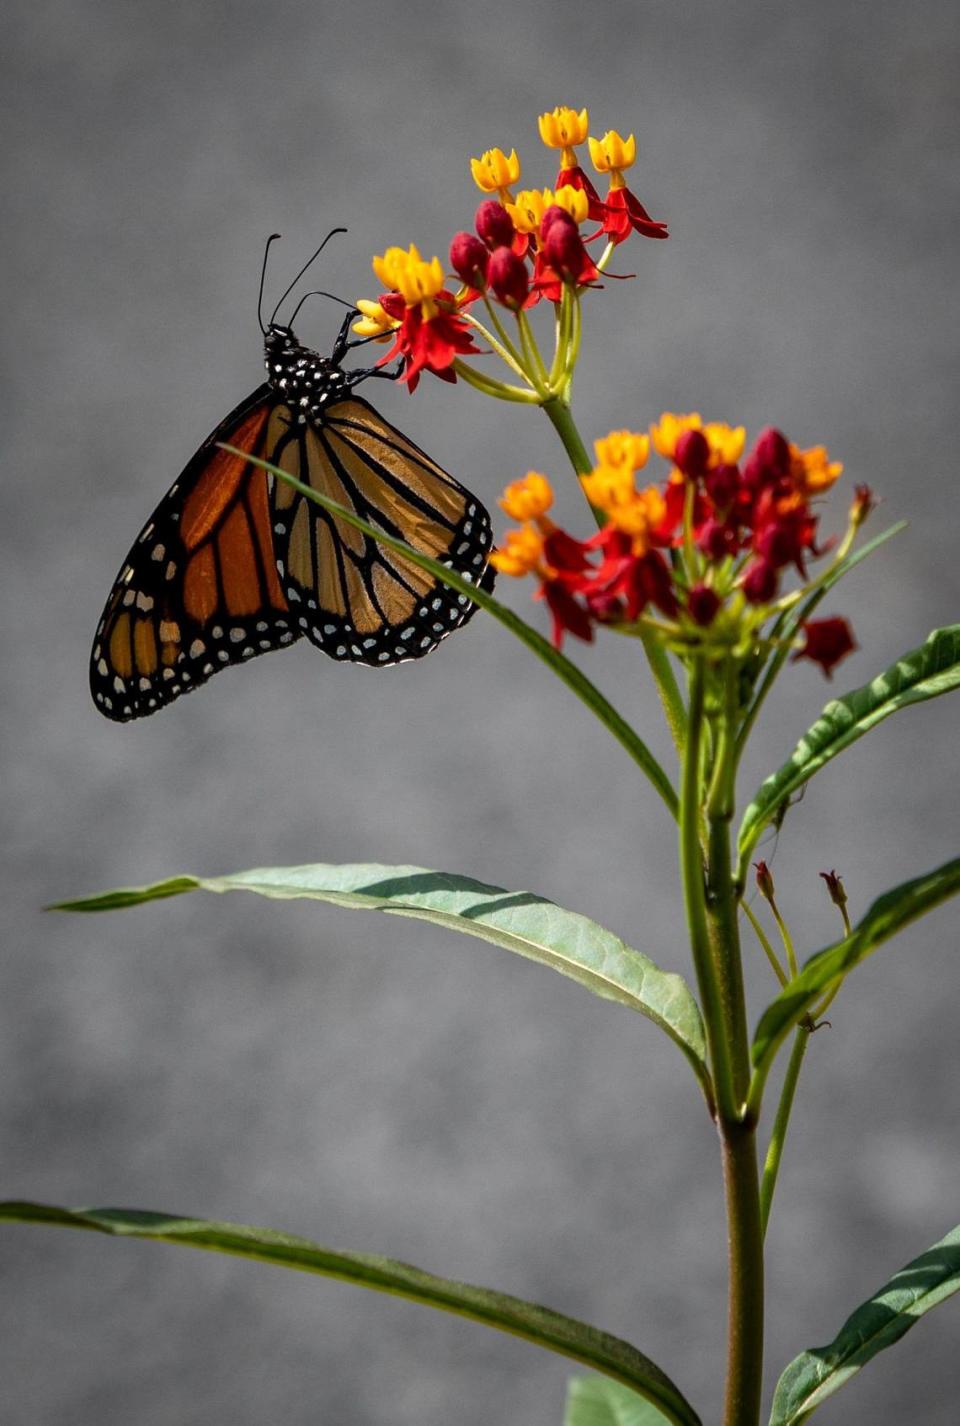 A Monarch butterfly alights on a milkweed plant in a newly planted garden at Southwest 25th Road and U.S. 1. It’s part of phase two of The Underline, the urban trail and linear park that will run 10 miles beneath the Metrorail tracks from the Miami River to the Dadeland South station.